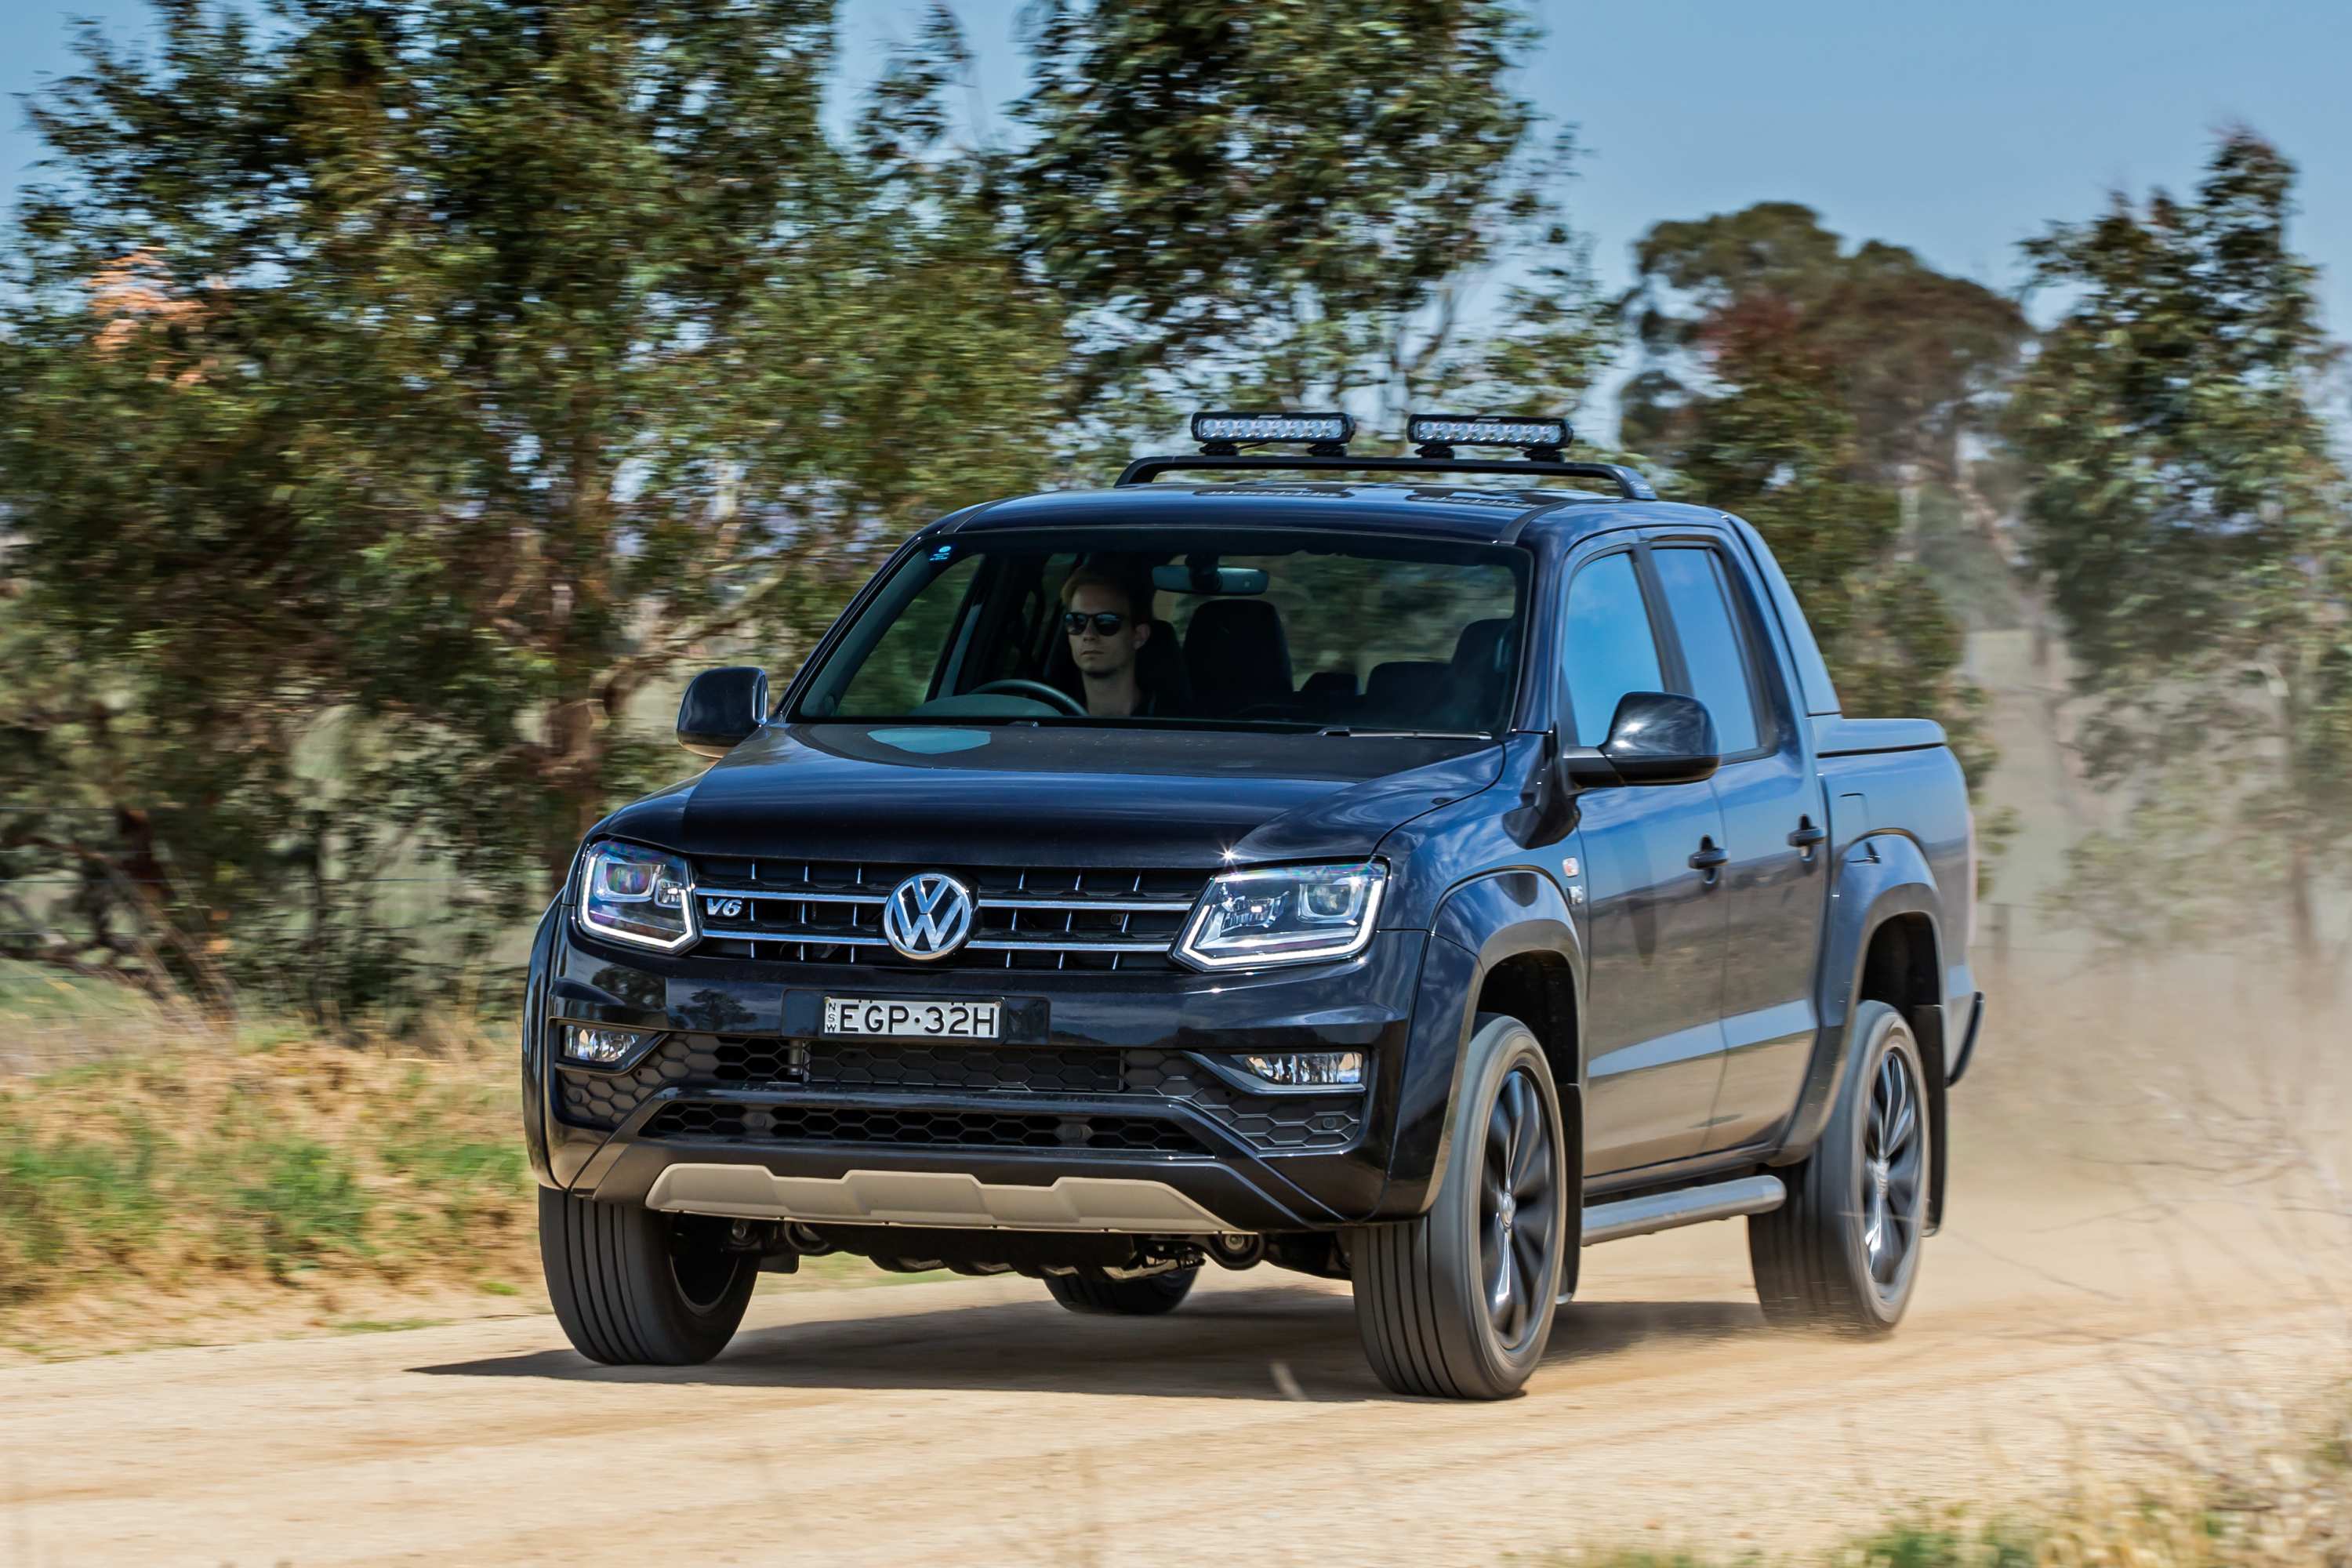 Volkswagen Amarok V6 580S: unlimited style, in limited numbers.